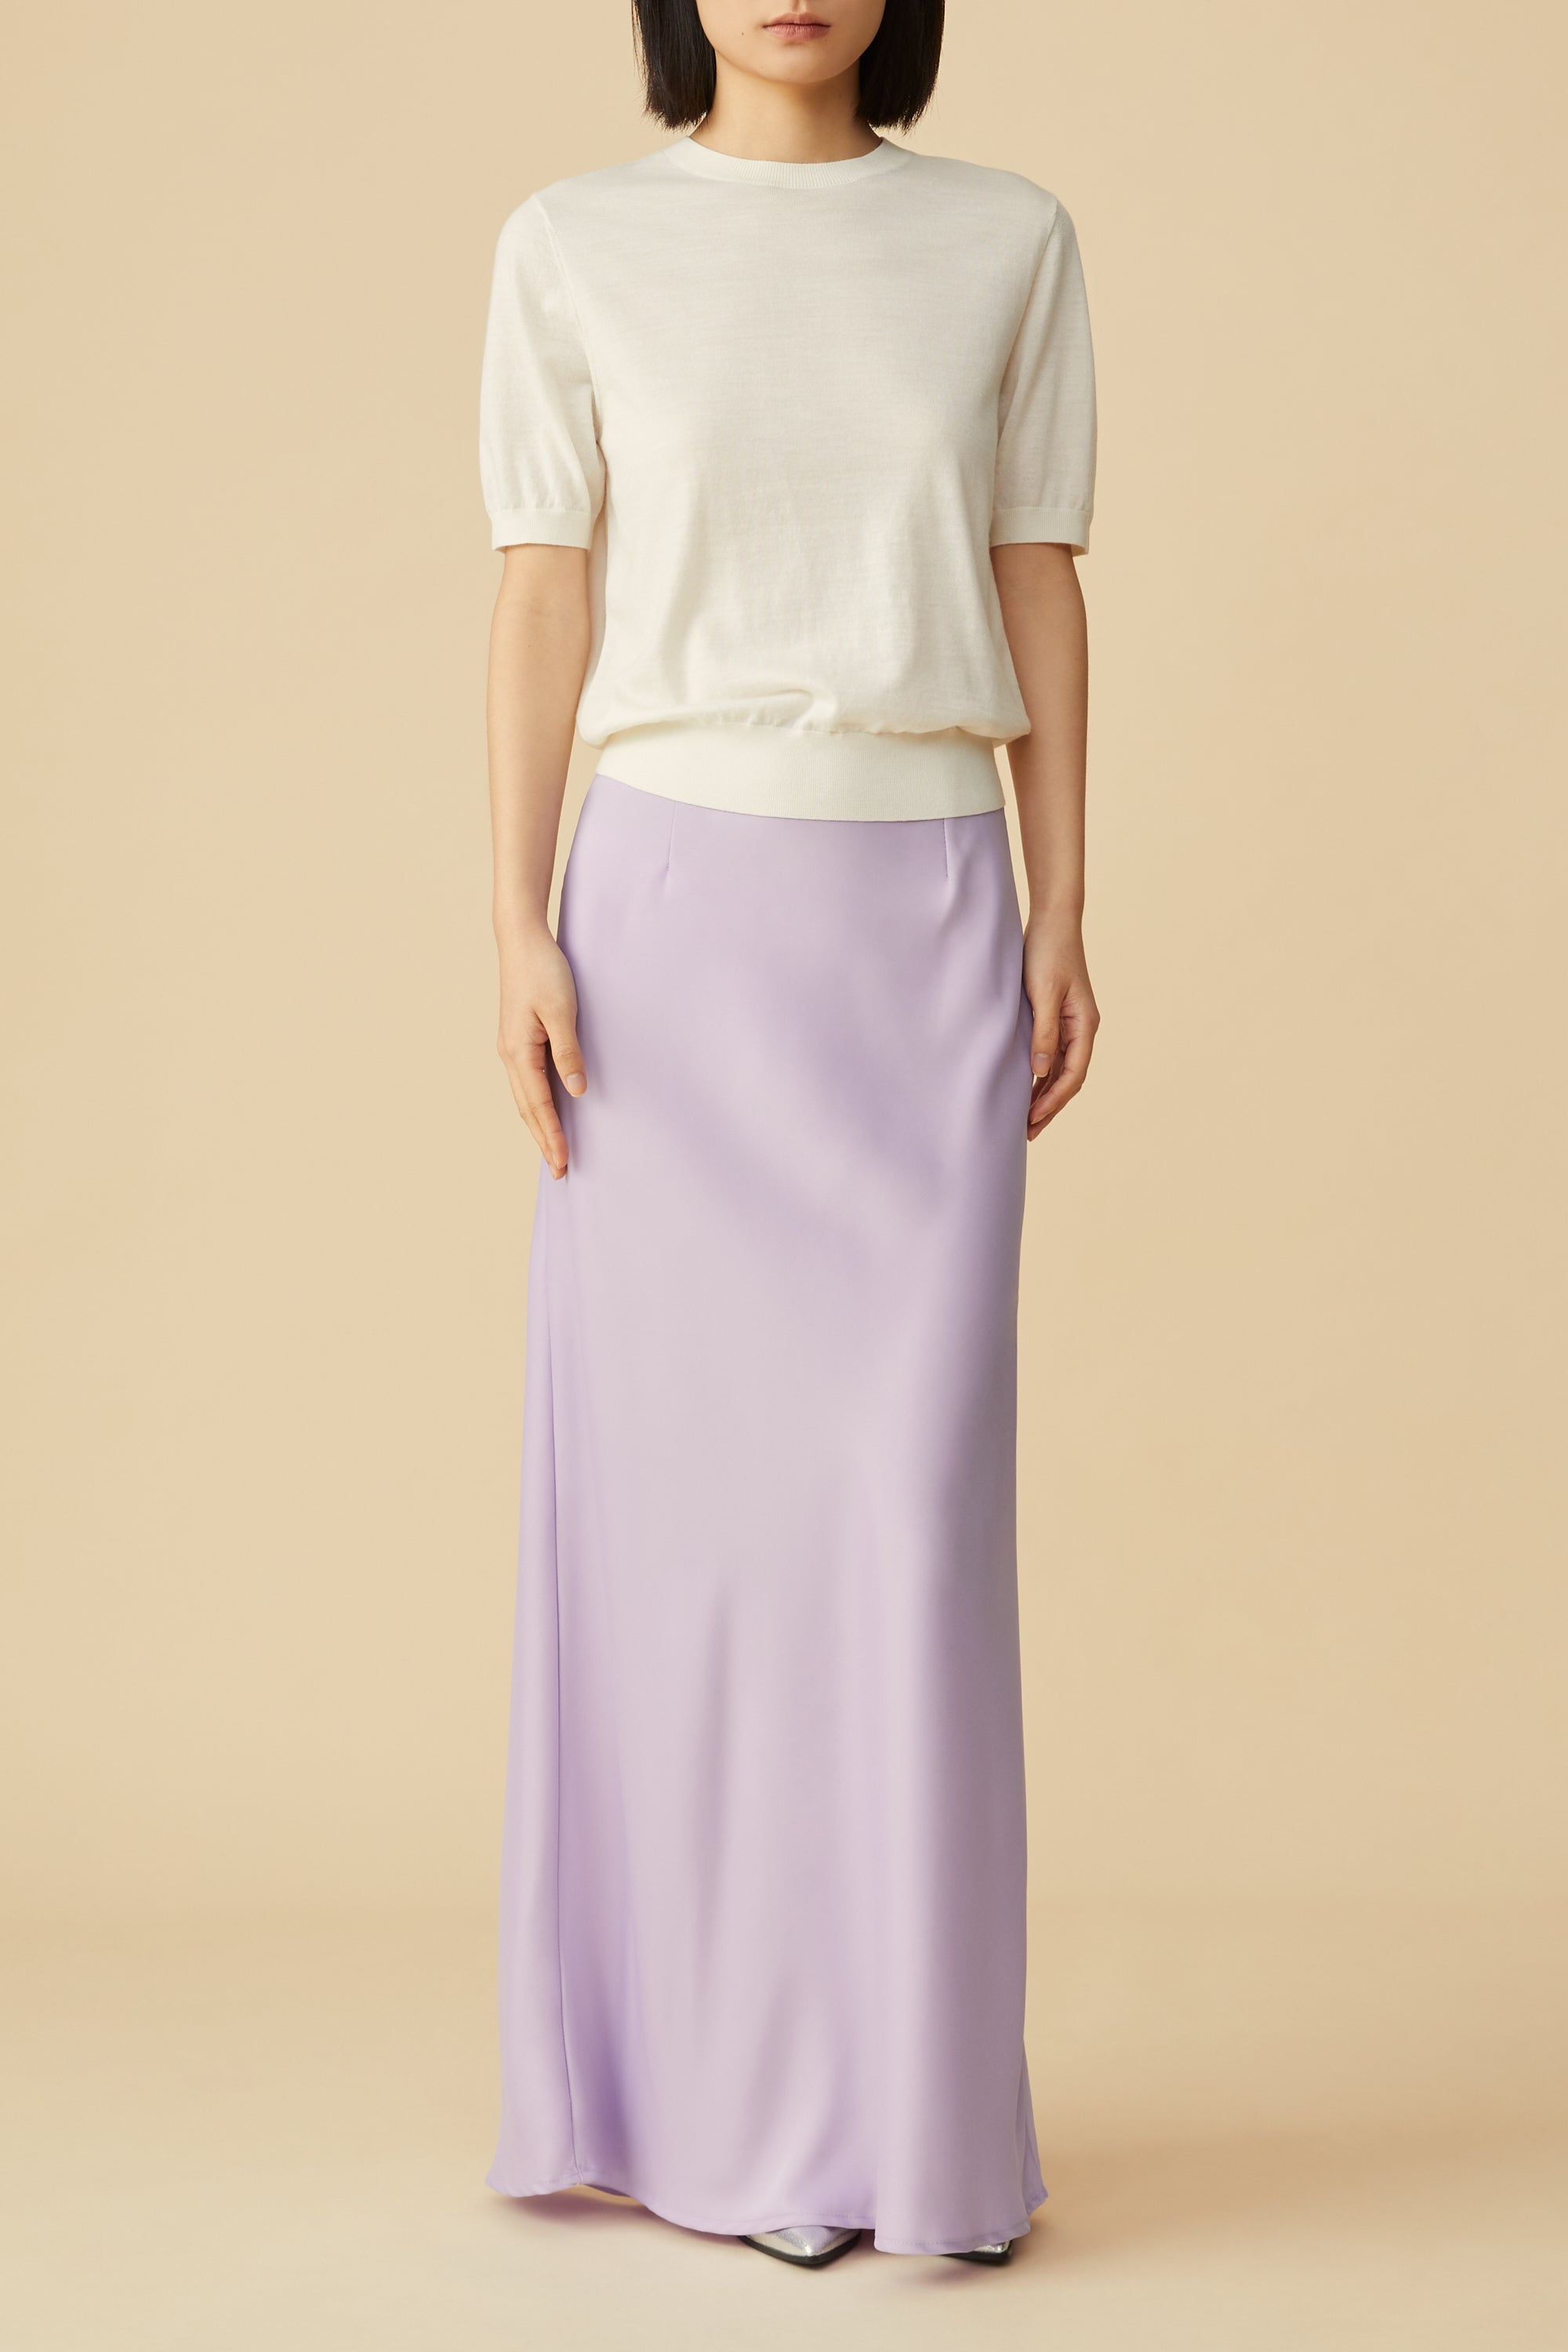 Lonoco's Aria White T-Shirt Sweater with Eliana Satin Maxi Skirt in Lilac